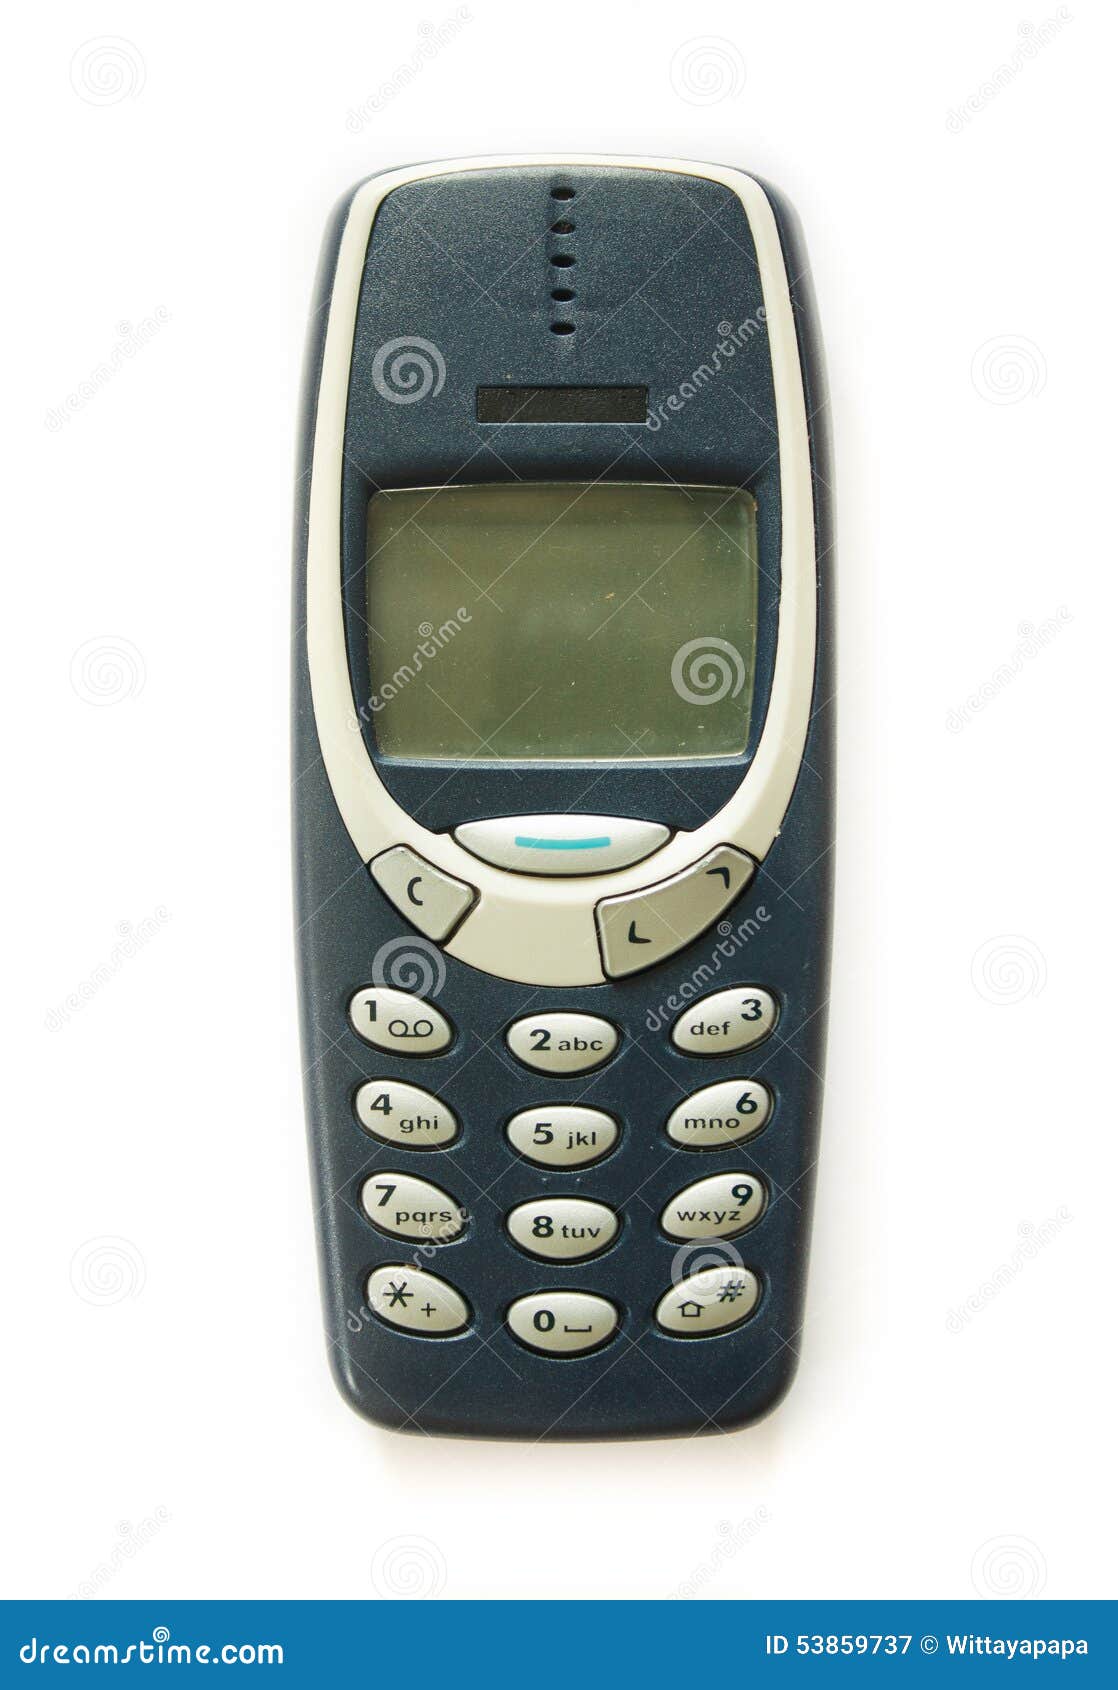 download clipart for nokia - photo #50